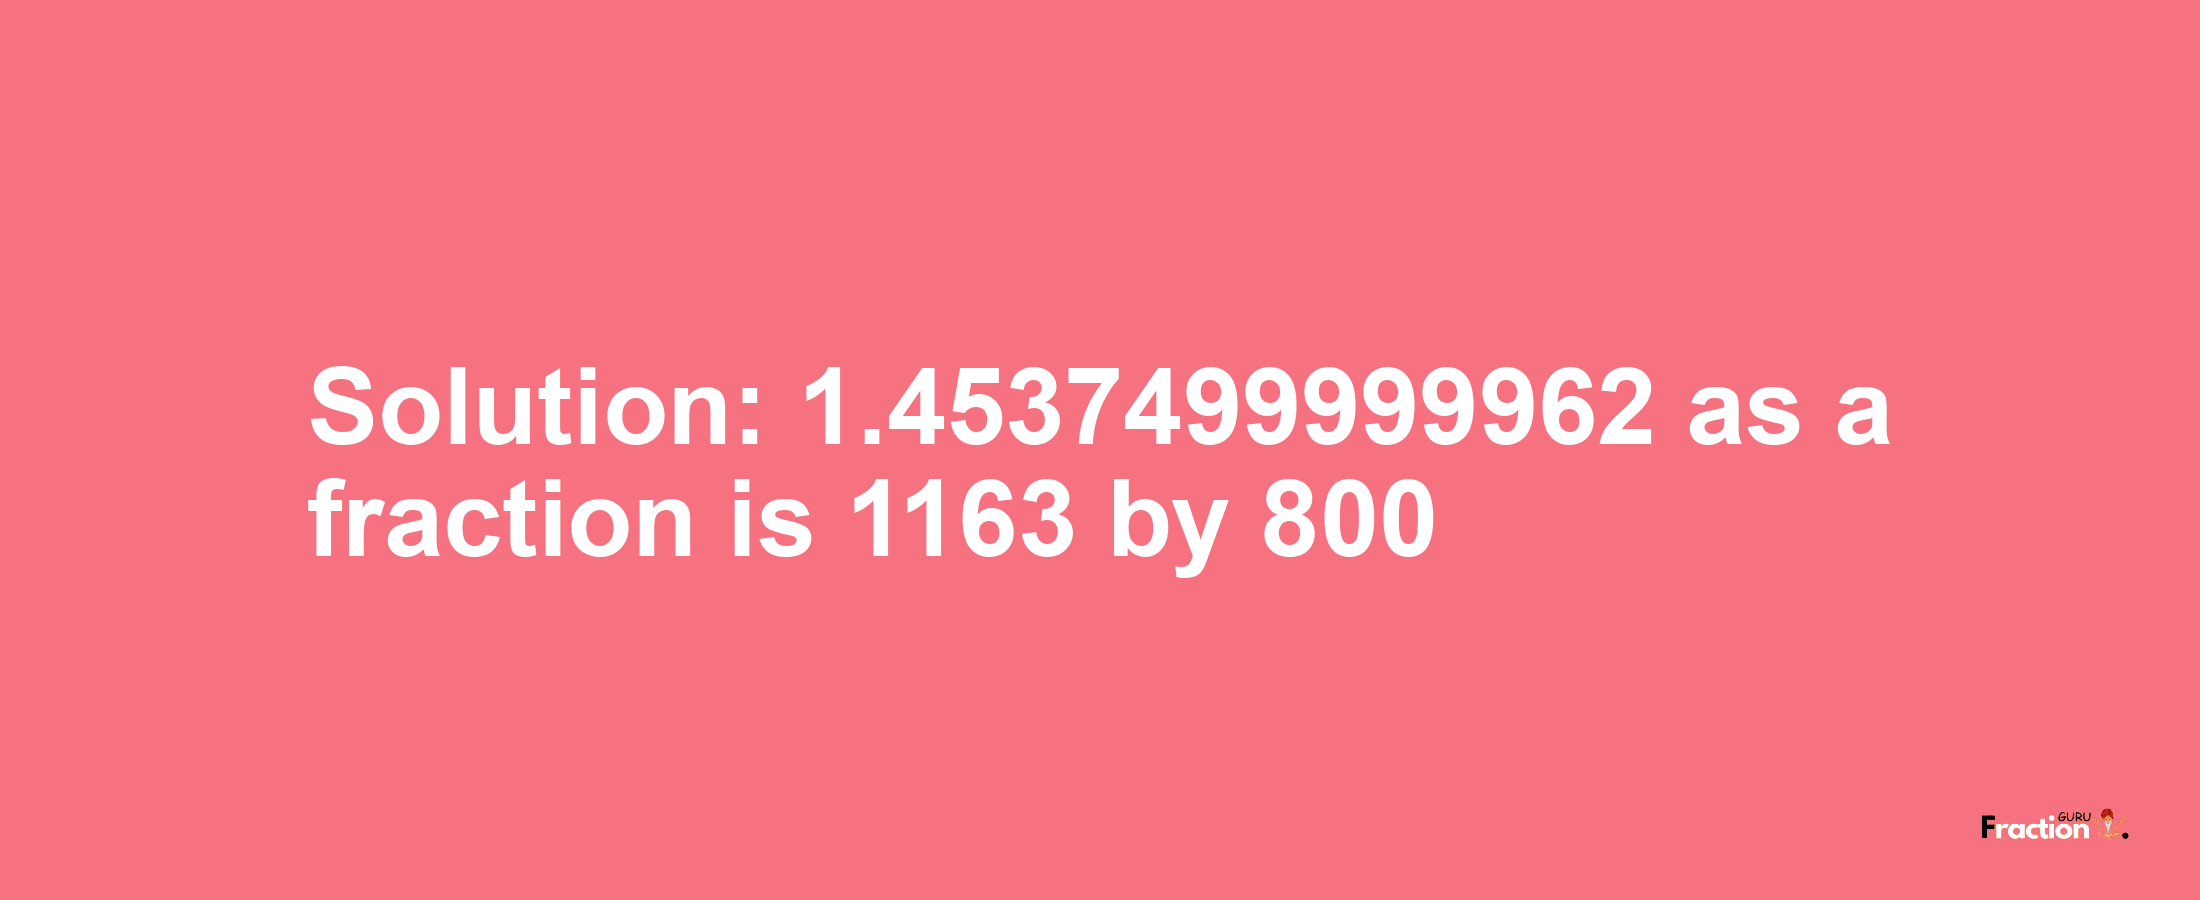 Solution:1.4537499999962 as a fraction is 1163/800